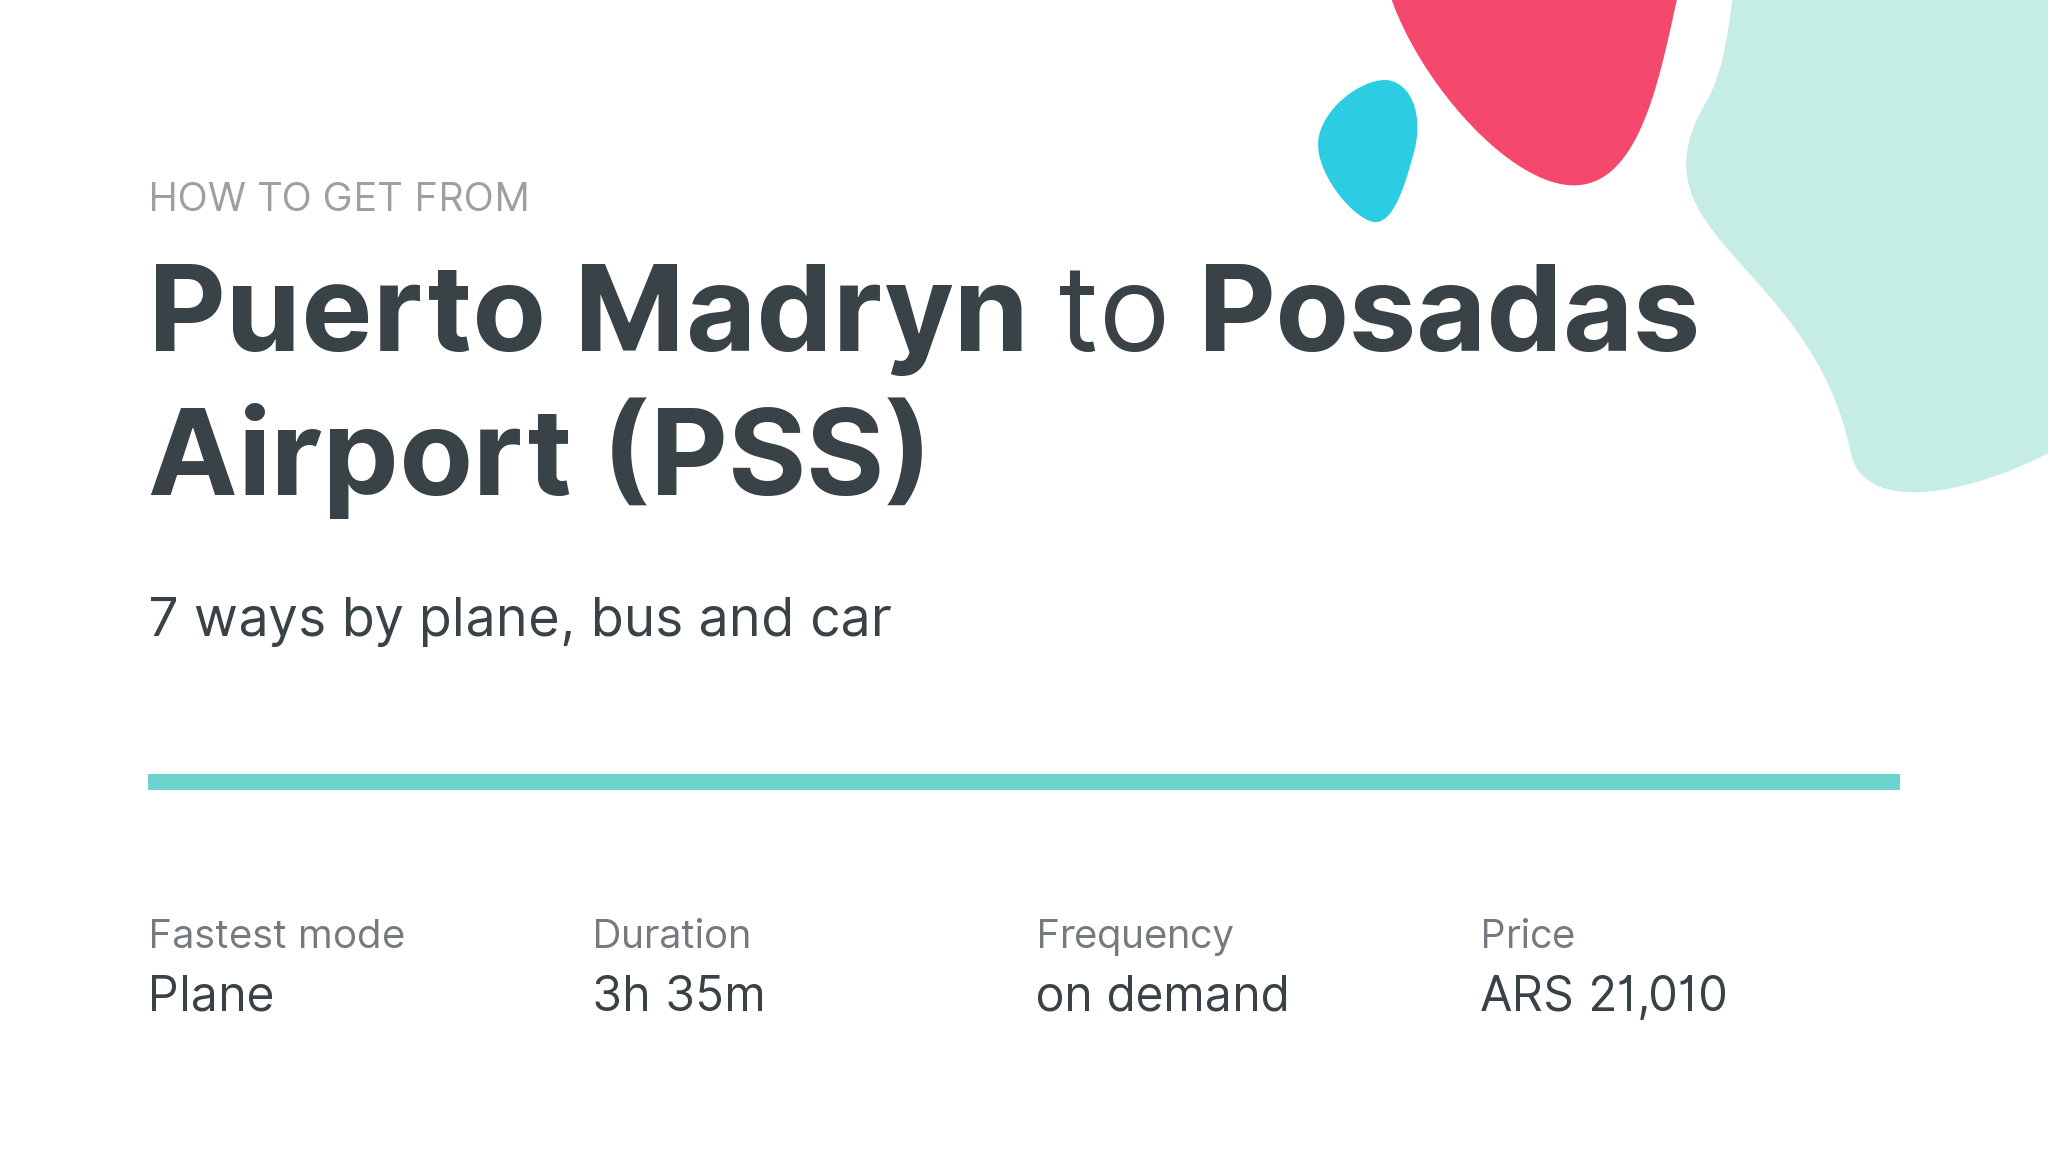 How do I get from Puerto Madryn to Posadas Airport (PSS)